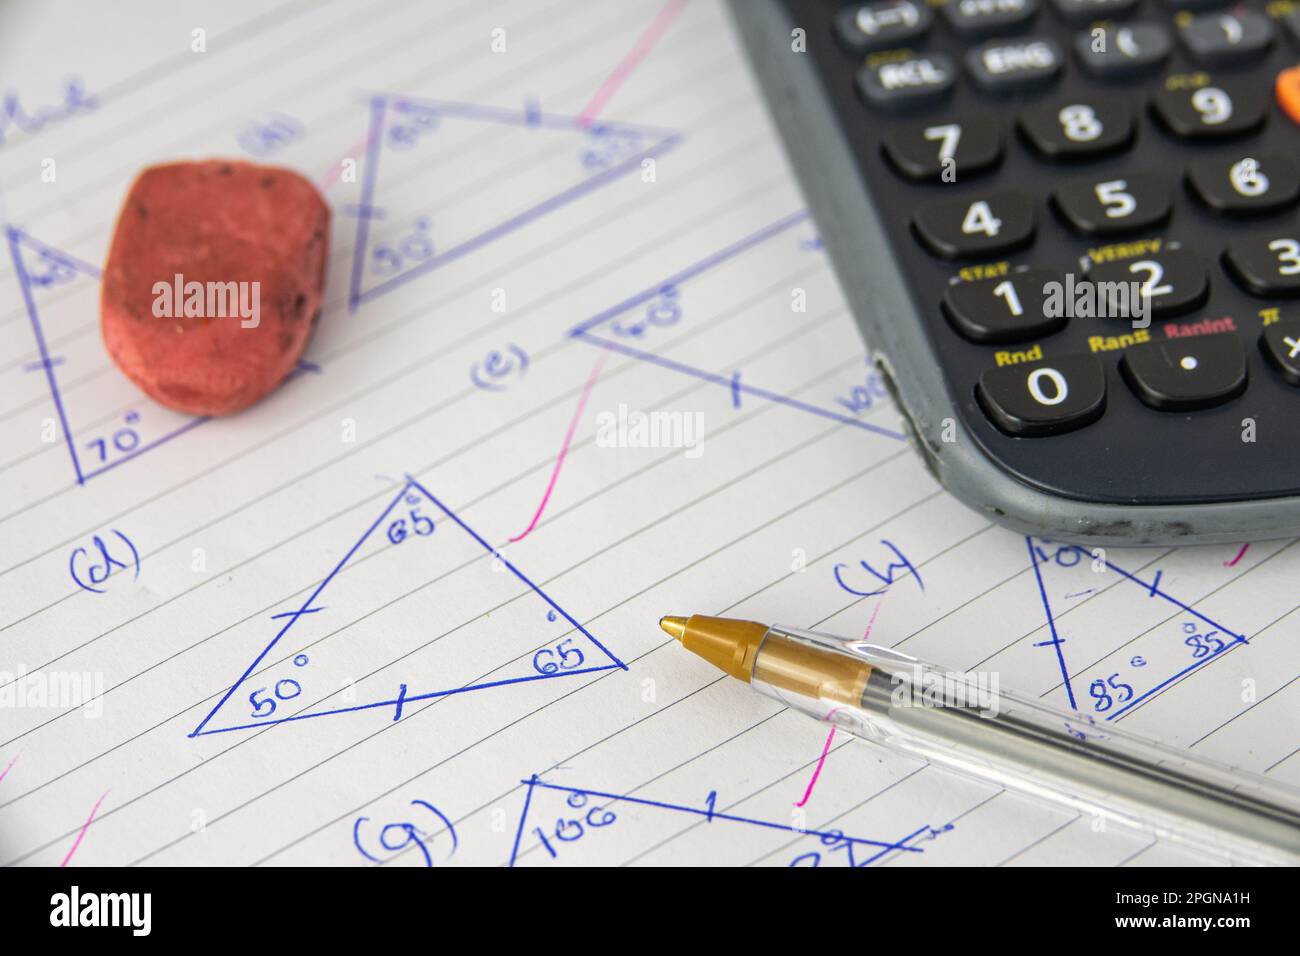 A Child's Math (Geometry) Homework Or Exam, With Calculator, Pen And Eraser Stock Photo